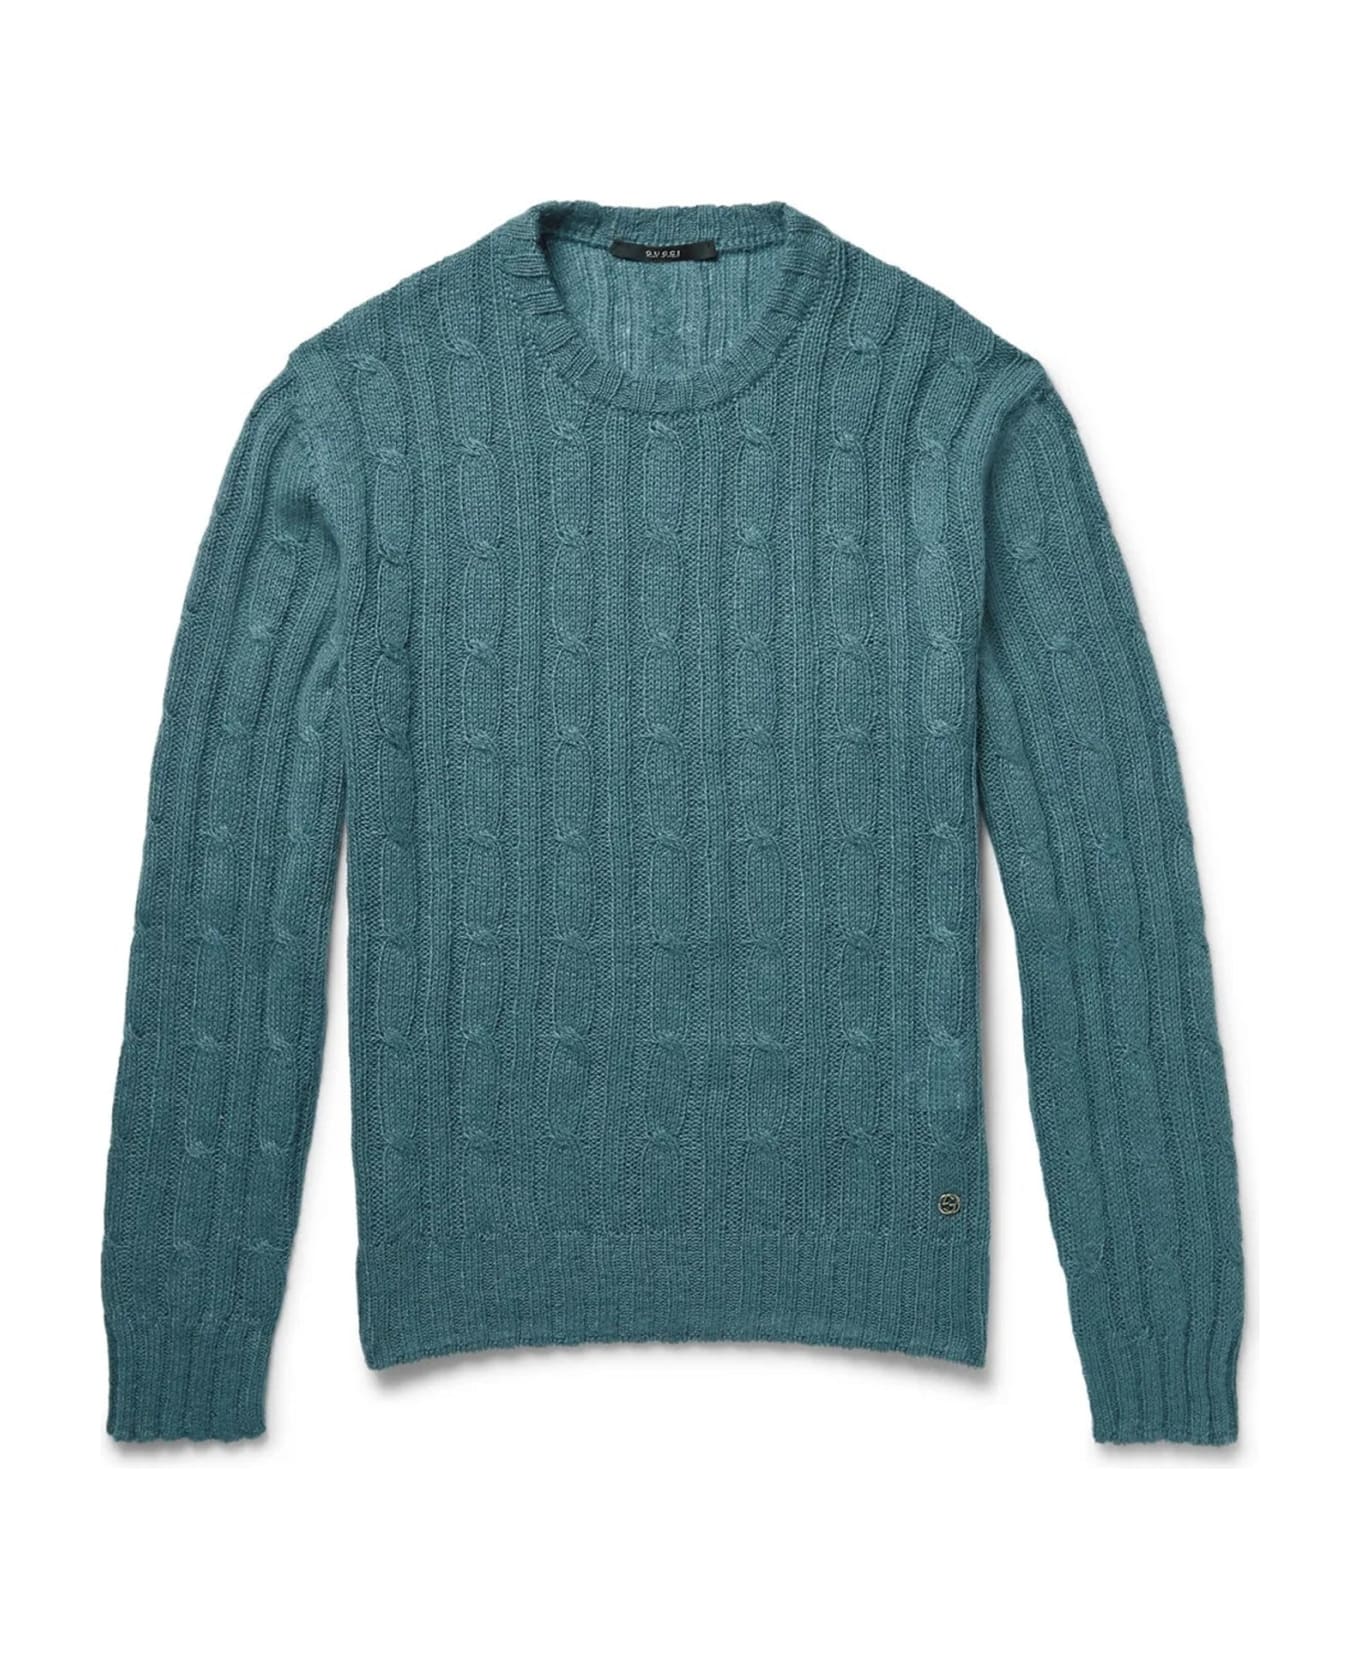 Gucci Cable Knit Sweater - Green ニットウェア